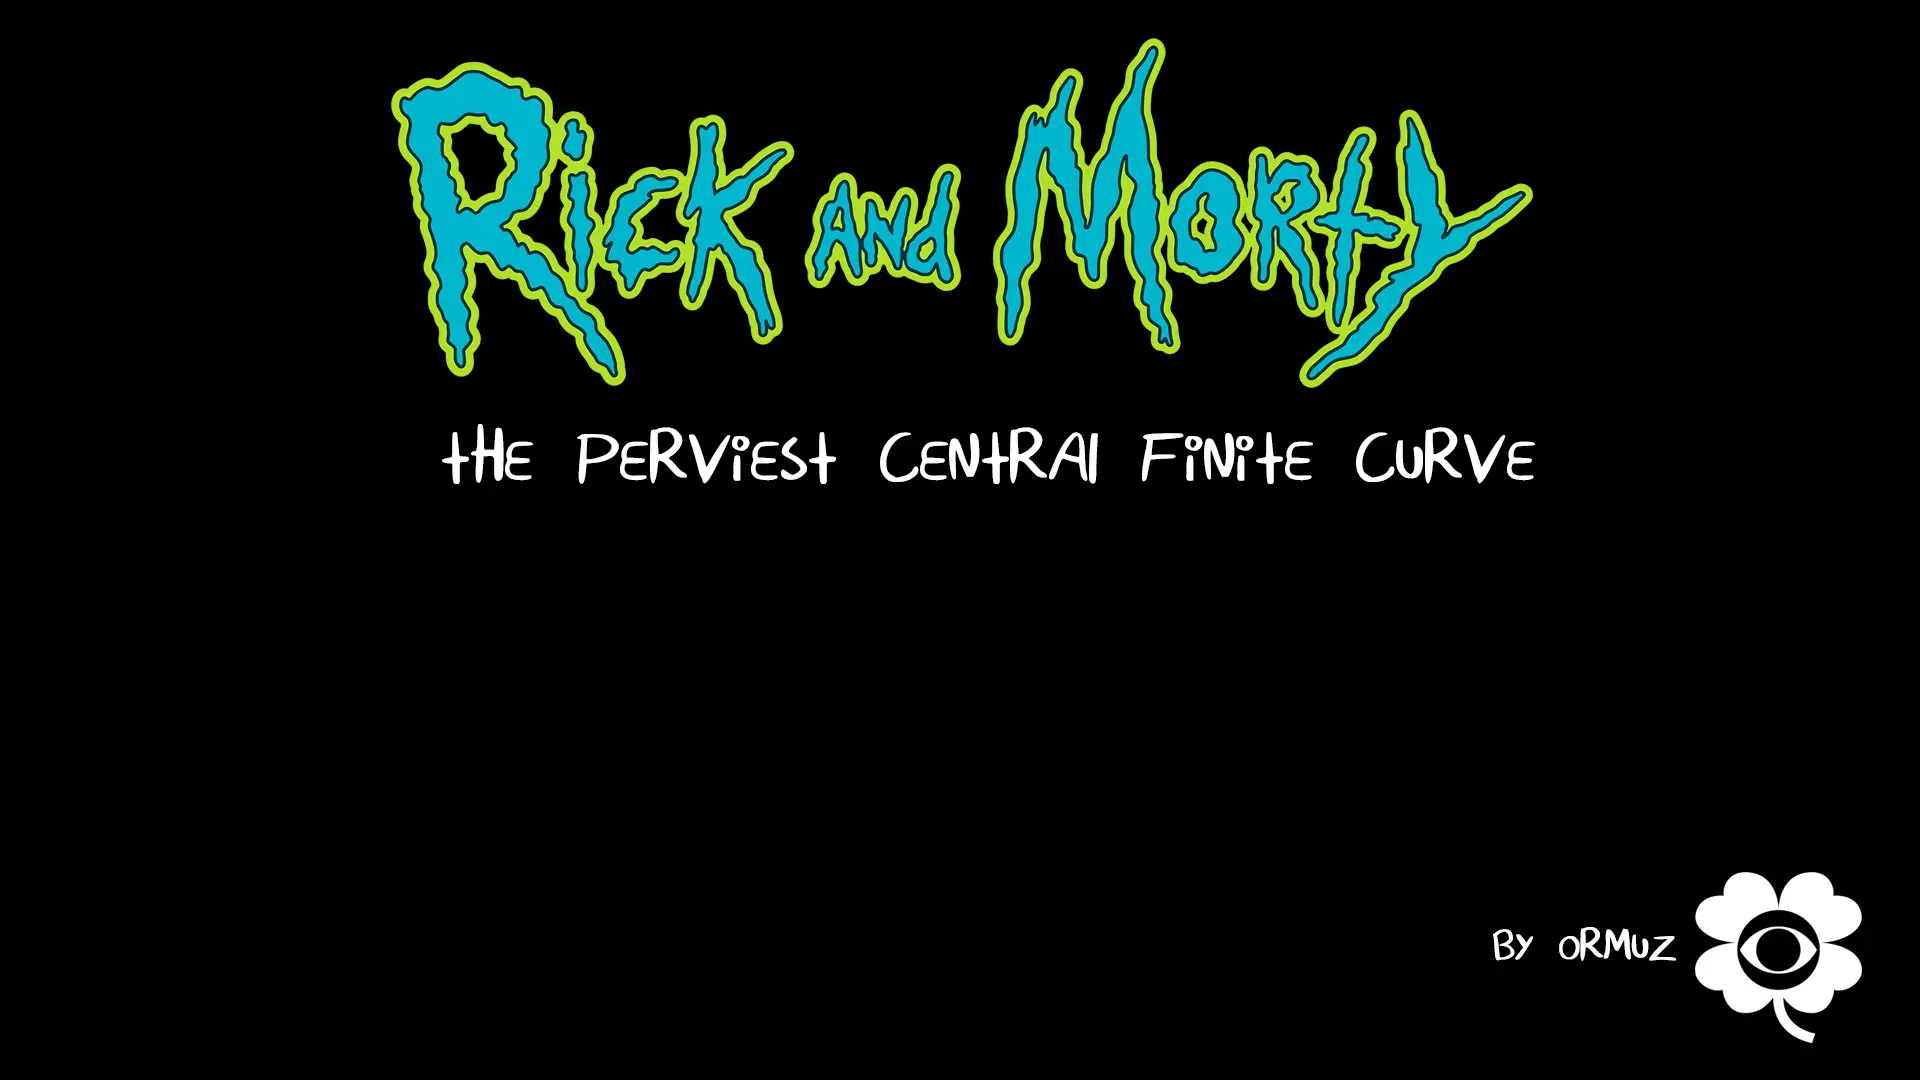 Rick and Morty - The Perviest Central Finite Curve main image